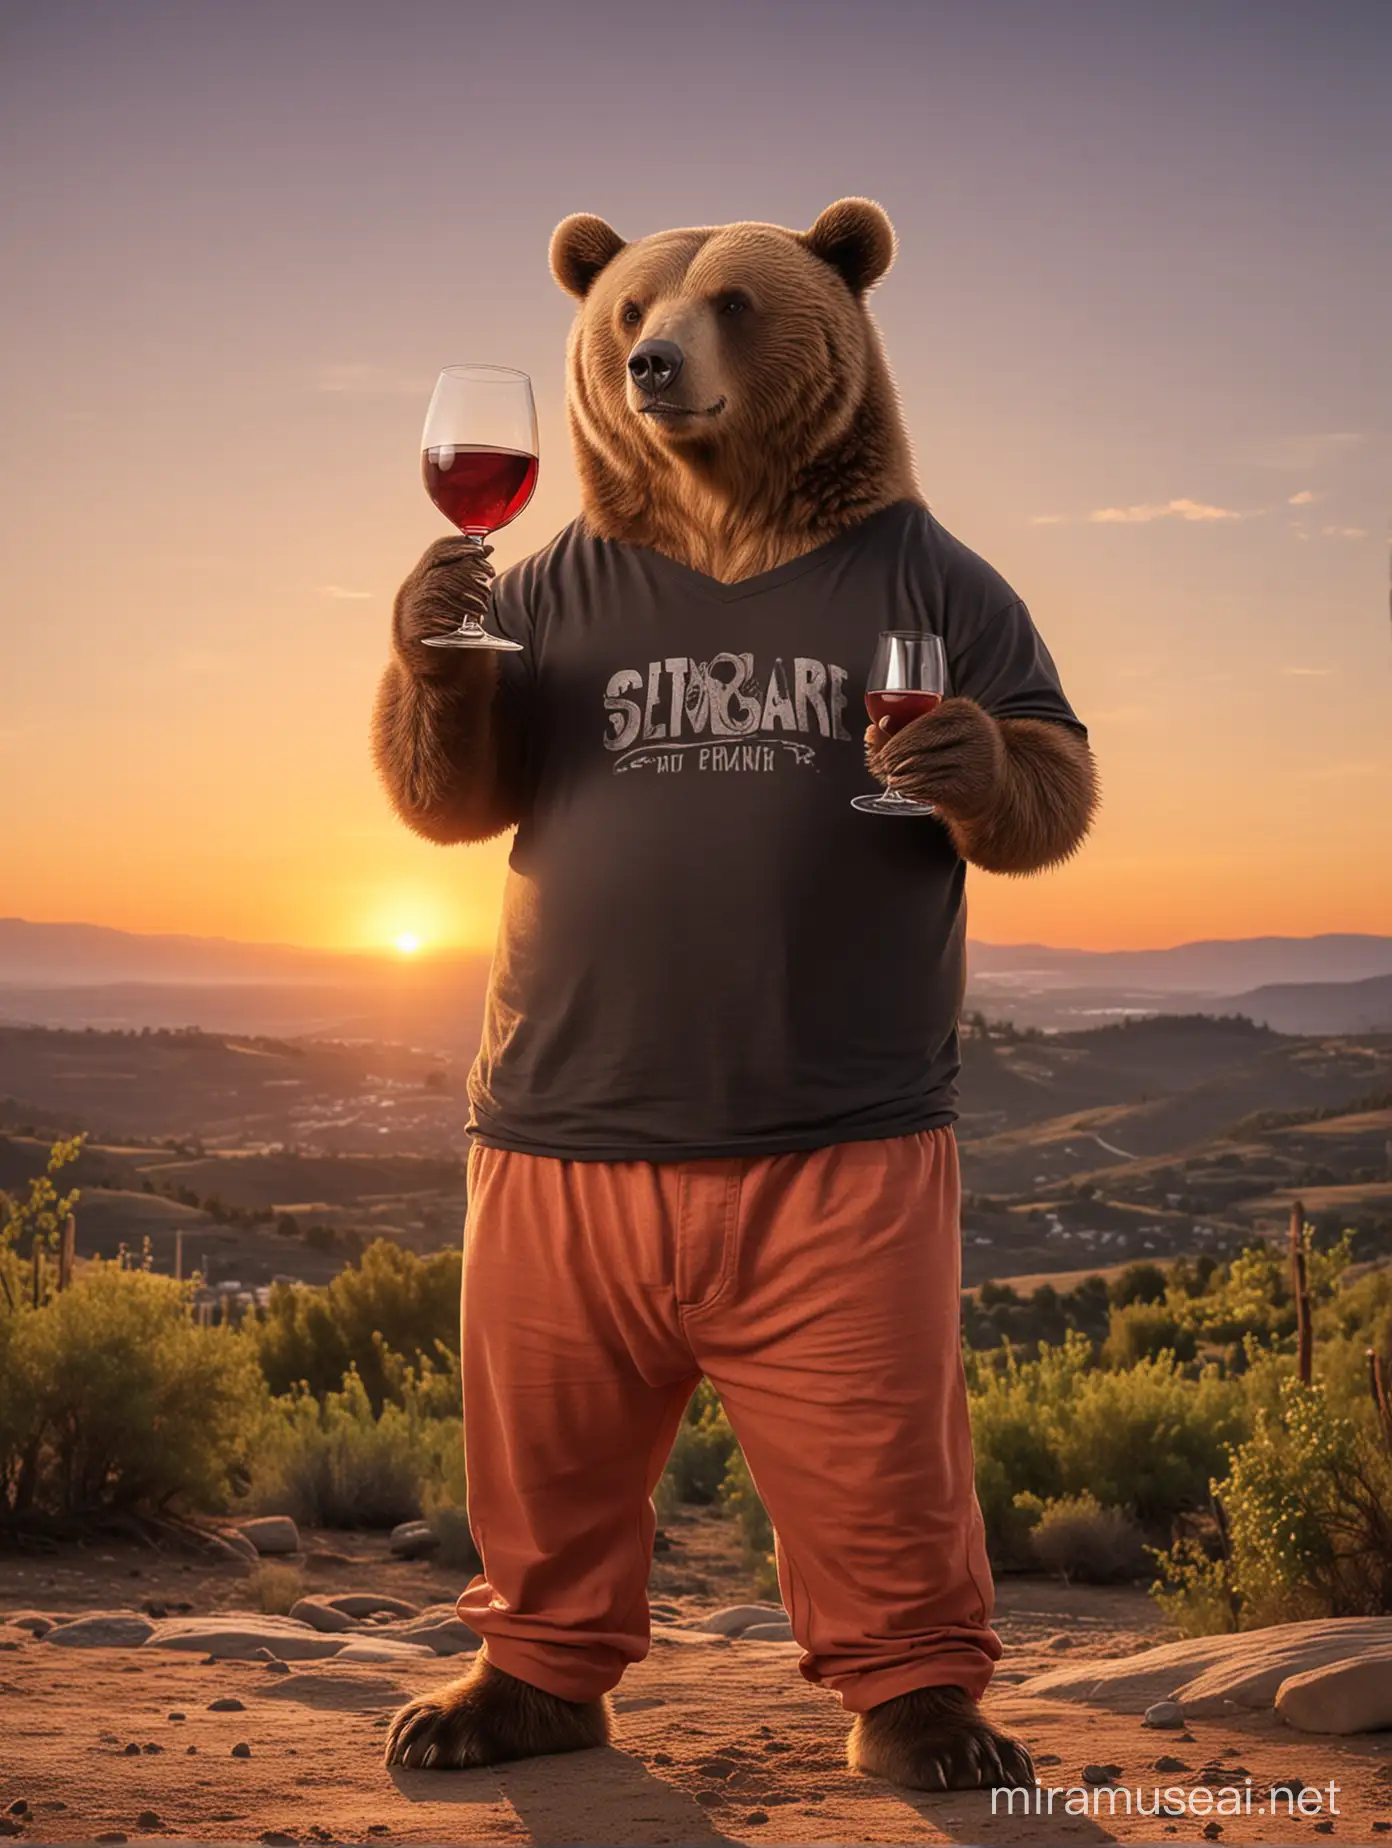 bear standing in a sunset, drinking a wine glass, wearing a pant and t-shirt, enjoying